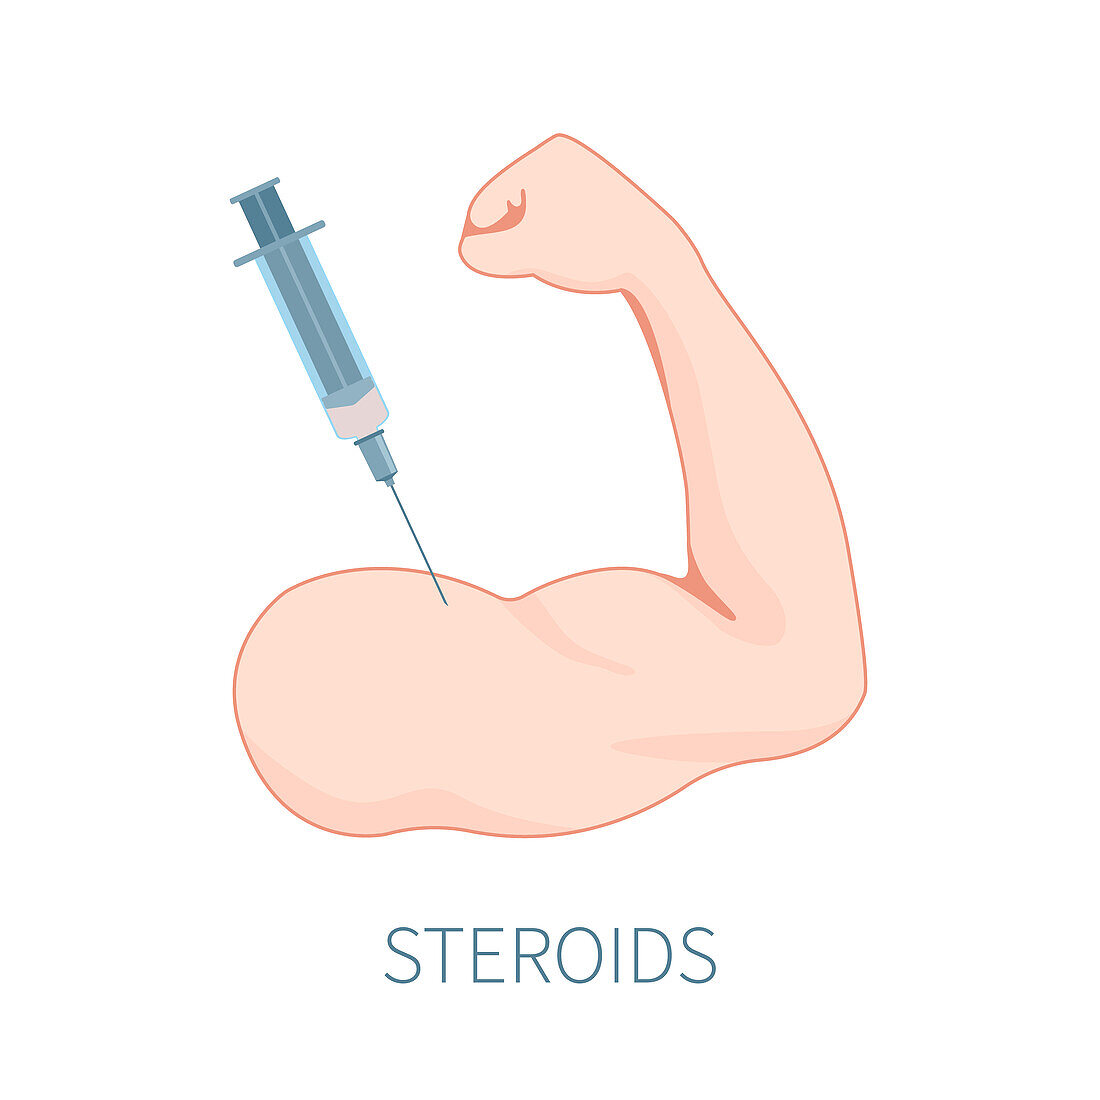 Anabolic steroids injection, conceptual illustration